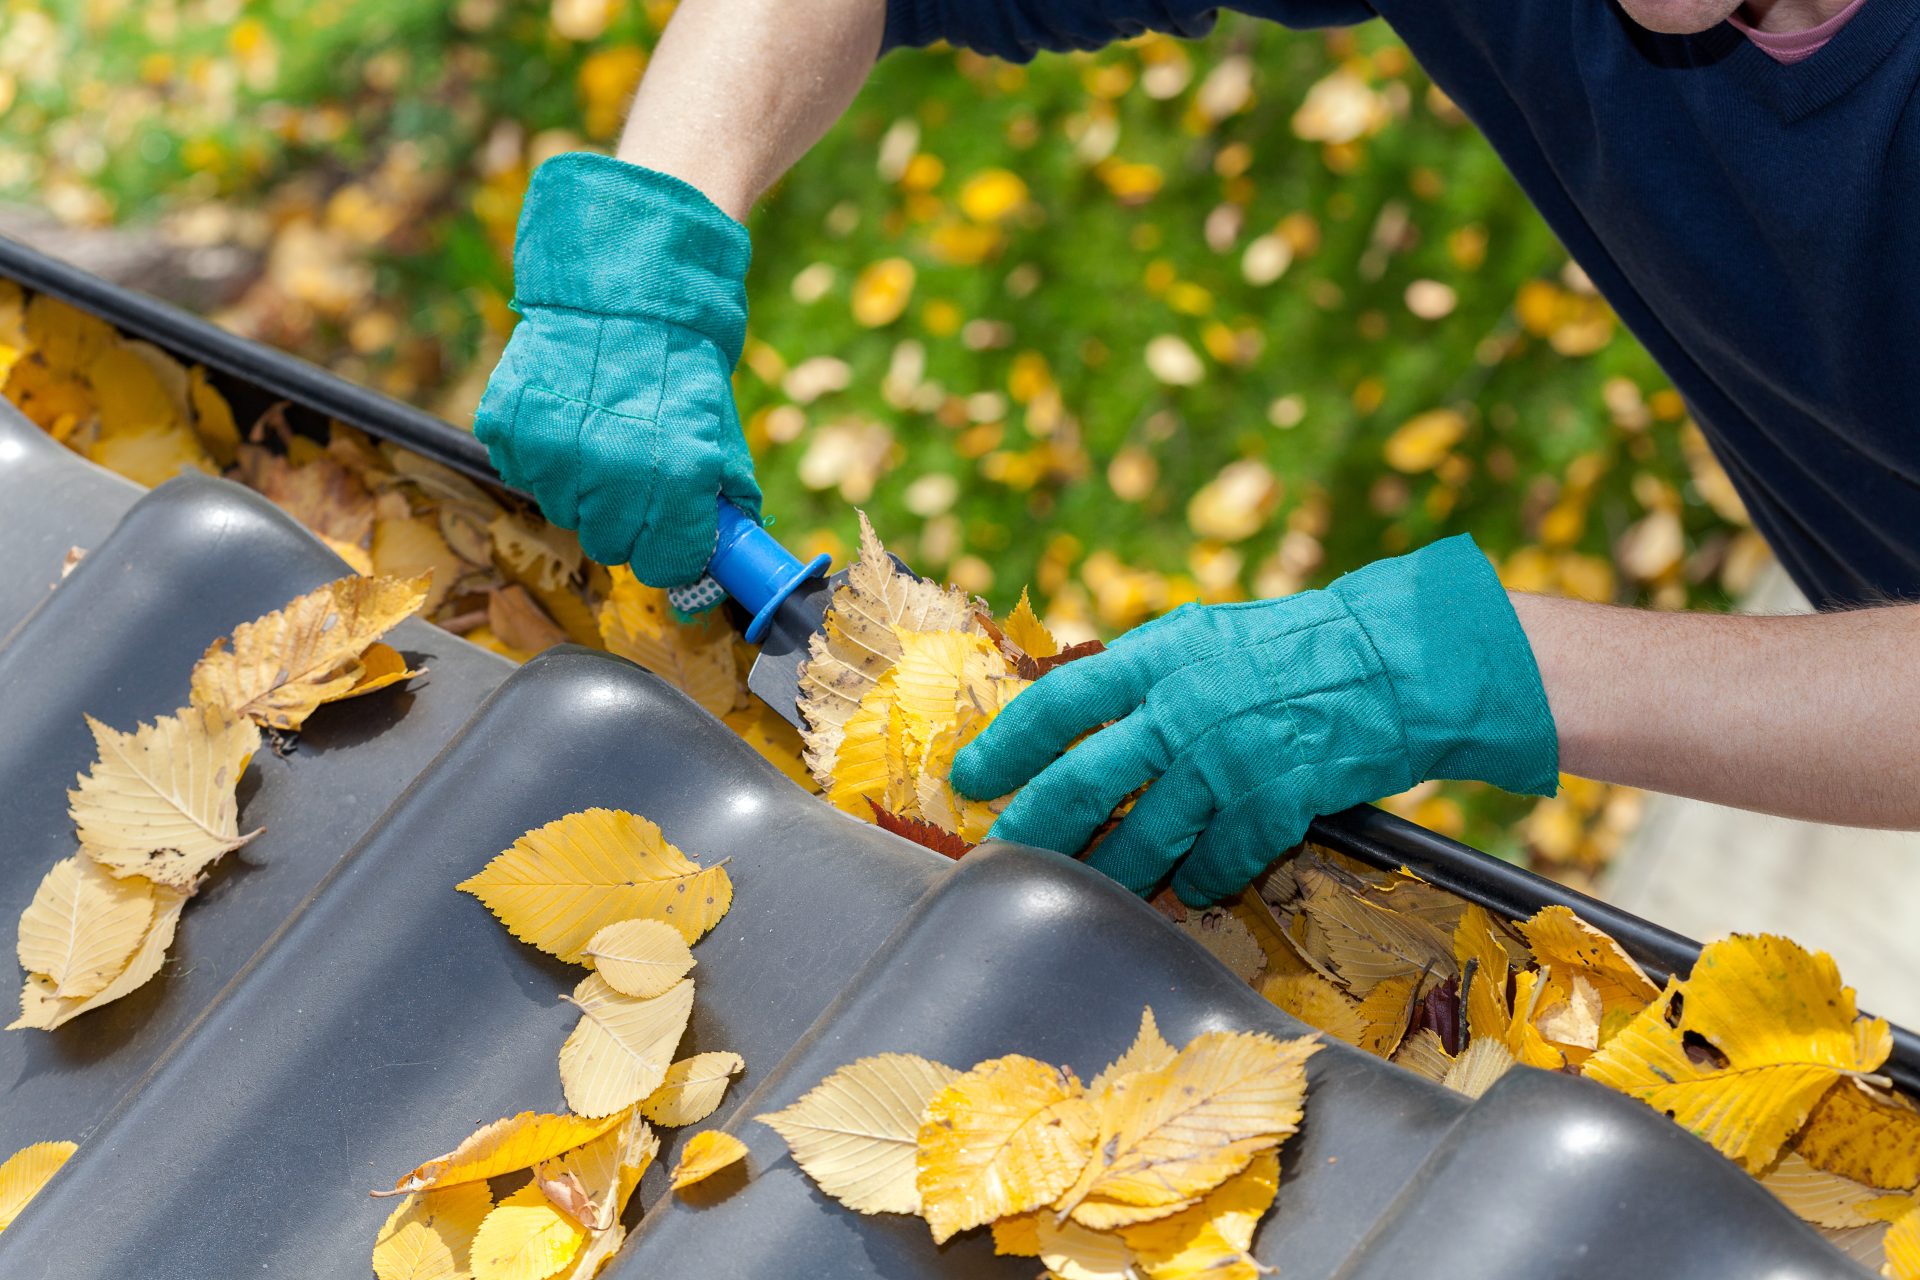 Don't Let Clogged Gutters Damage Your Home This Winter